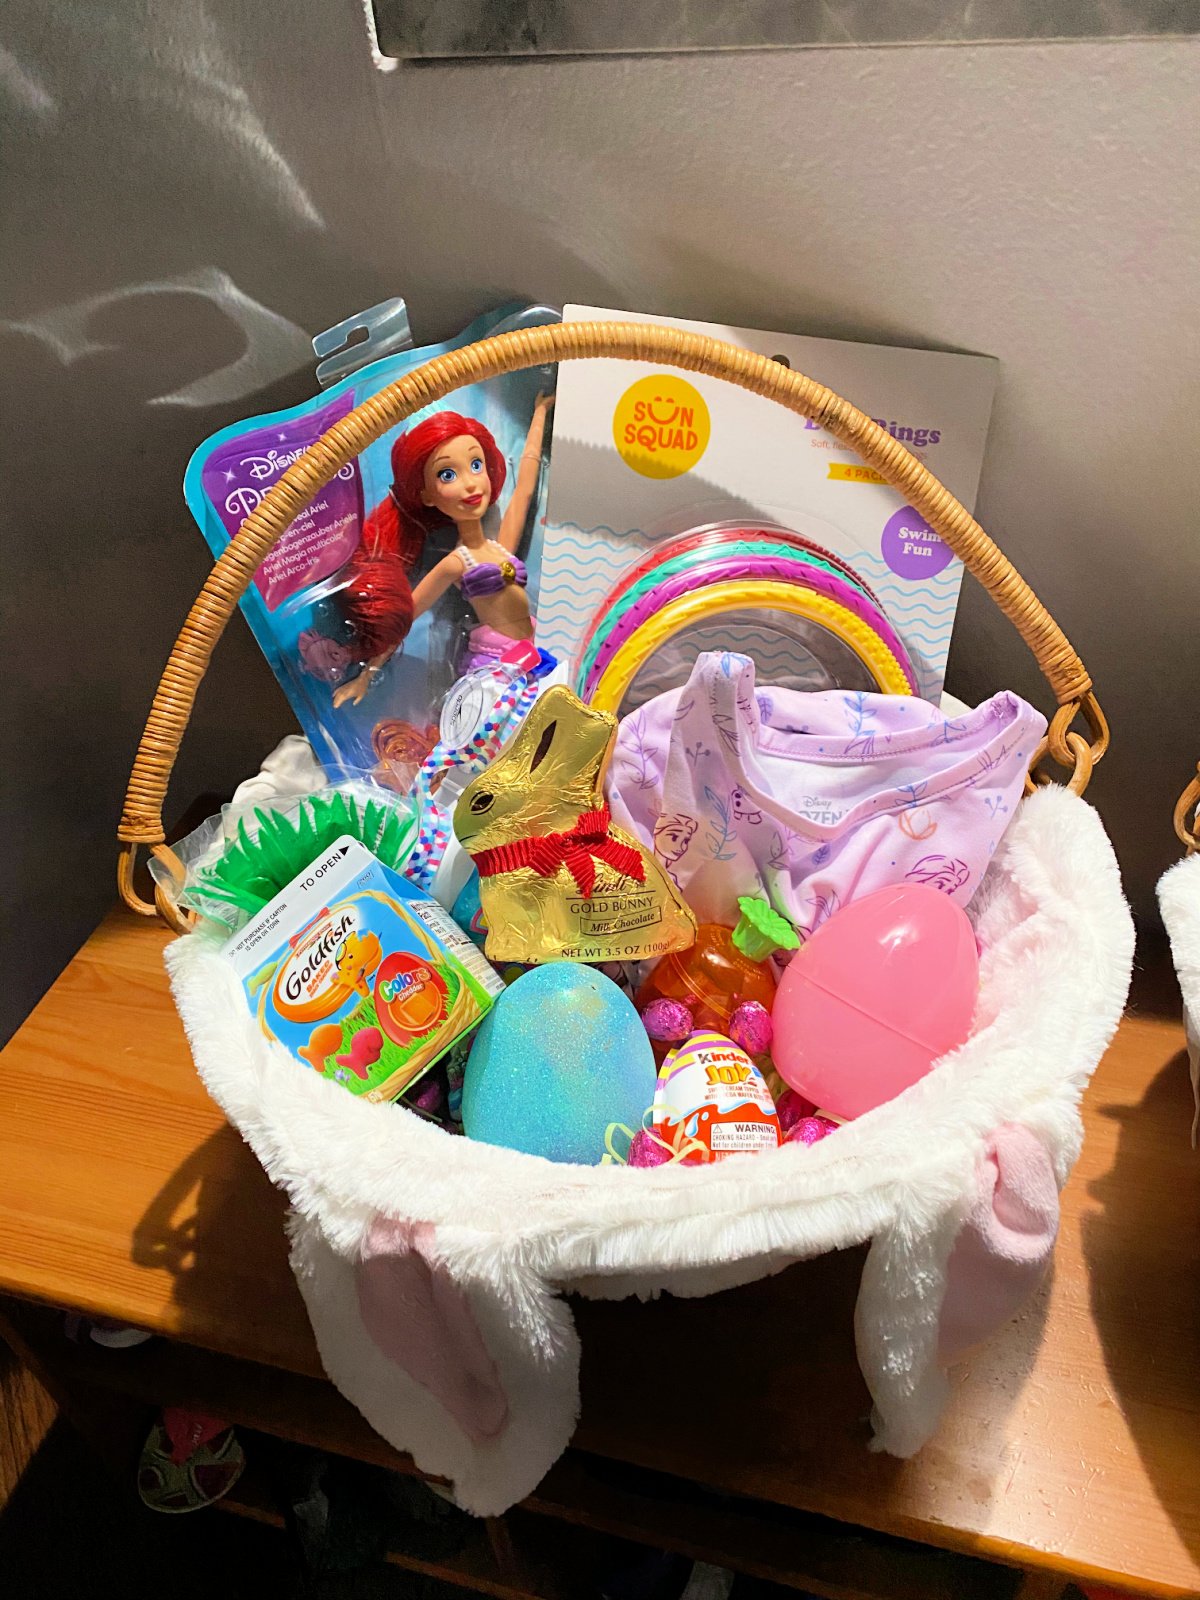 Easter basket filled with a mermaid barbie, plastic eggs, swim rings, and candy.